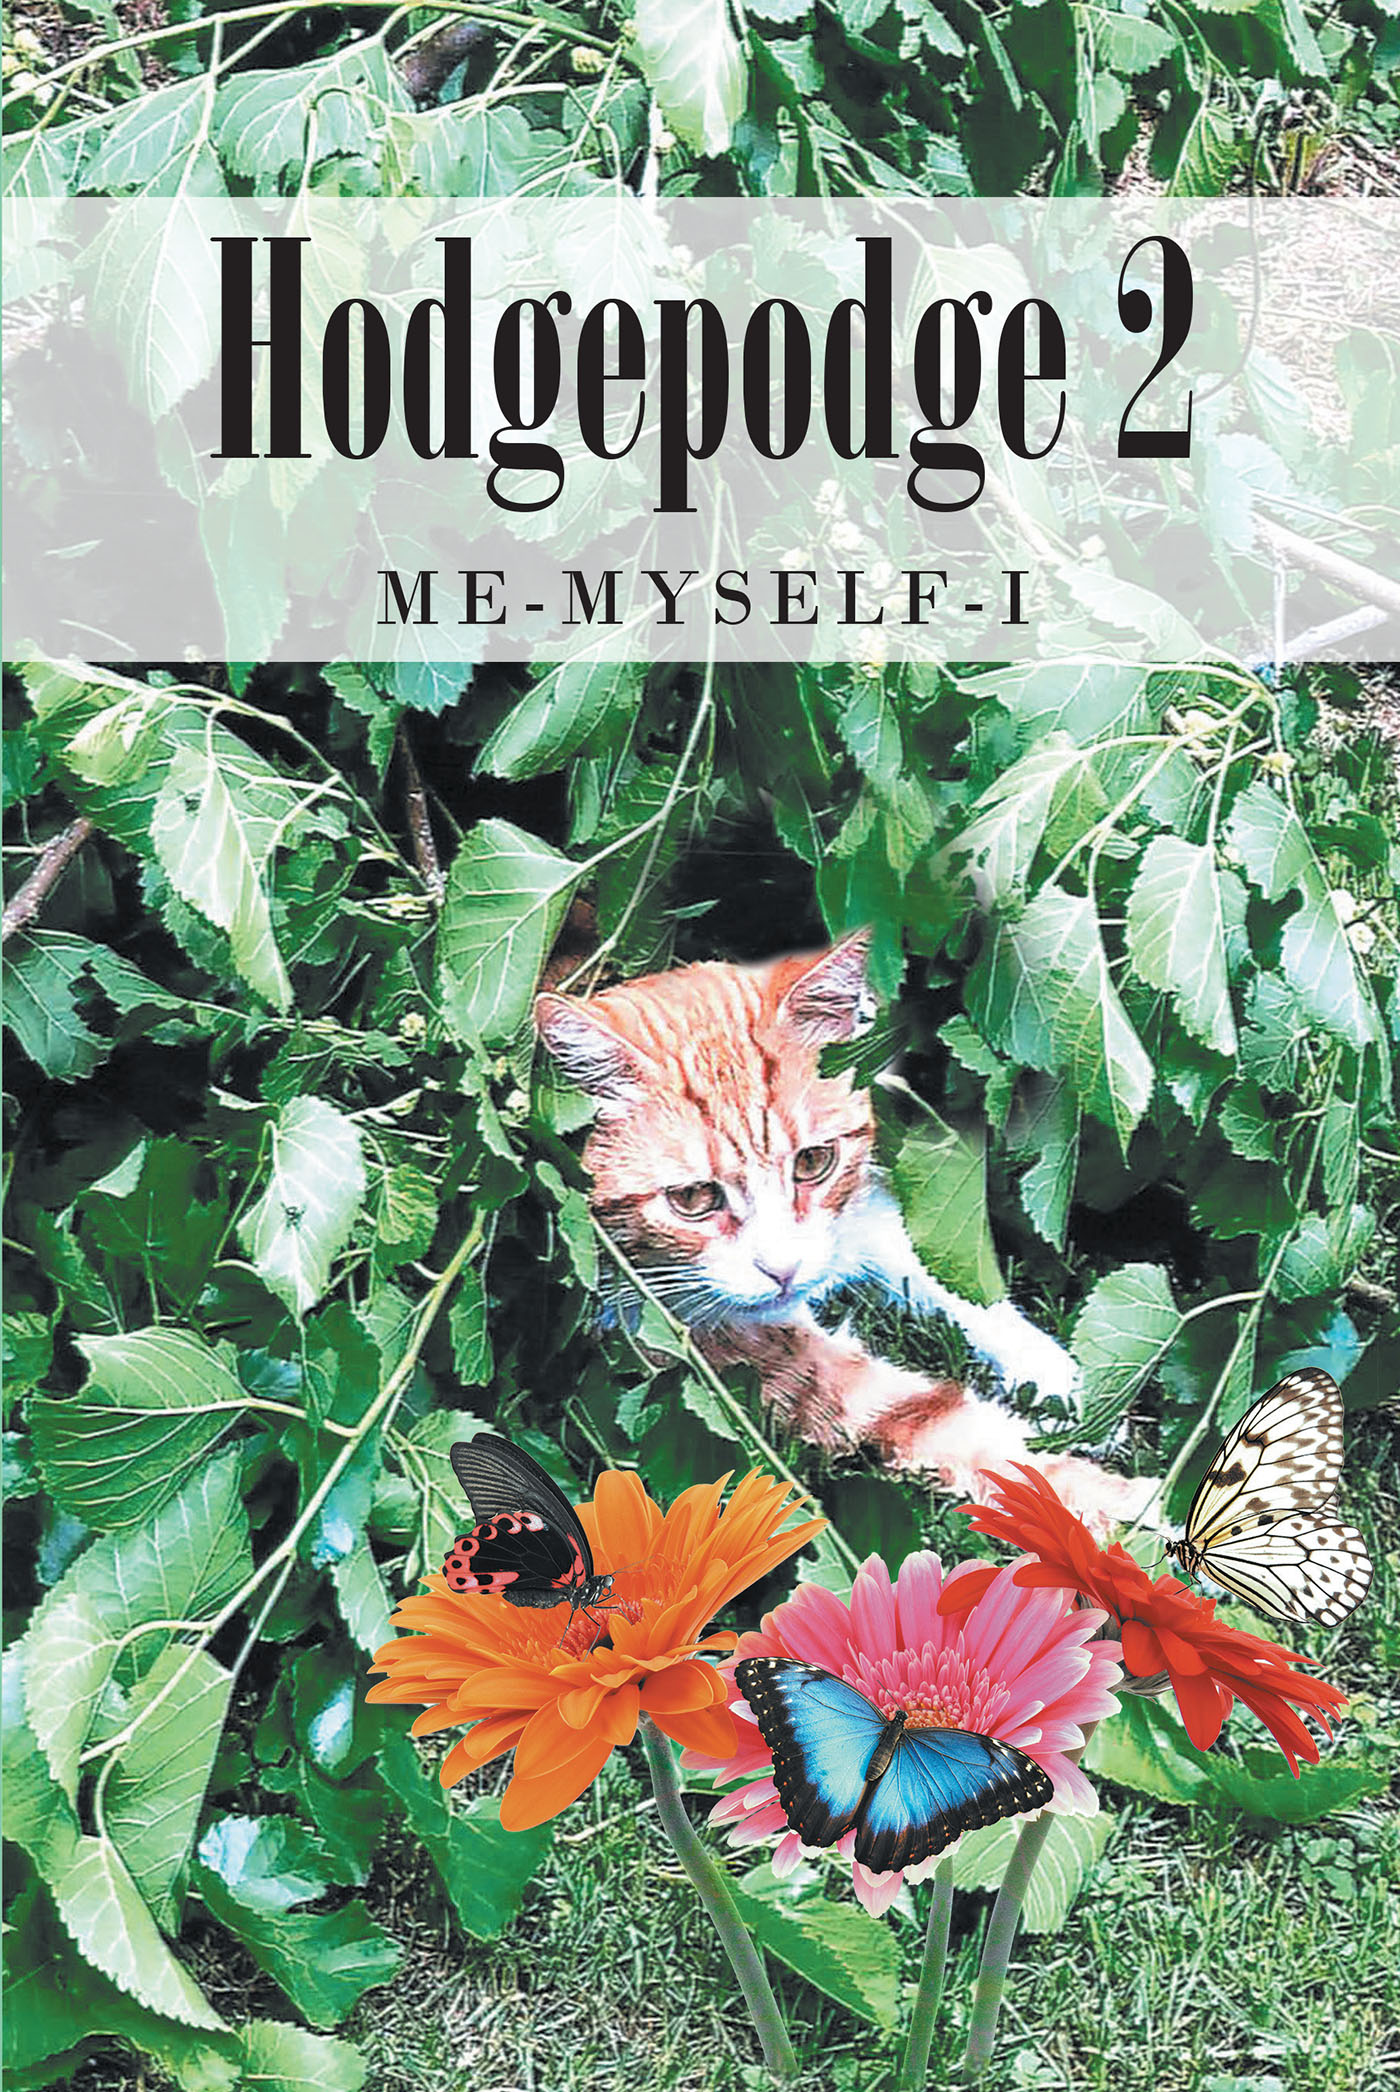 Author Jeannette Mann’s New Book, "Hodgepodge 2," is a Moving Memoir That Allows Readers to Experience the Highs and Lows of the Author’s Life